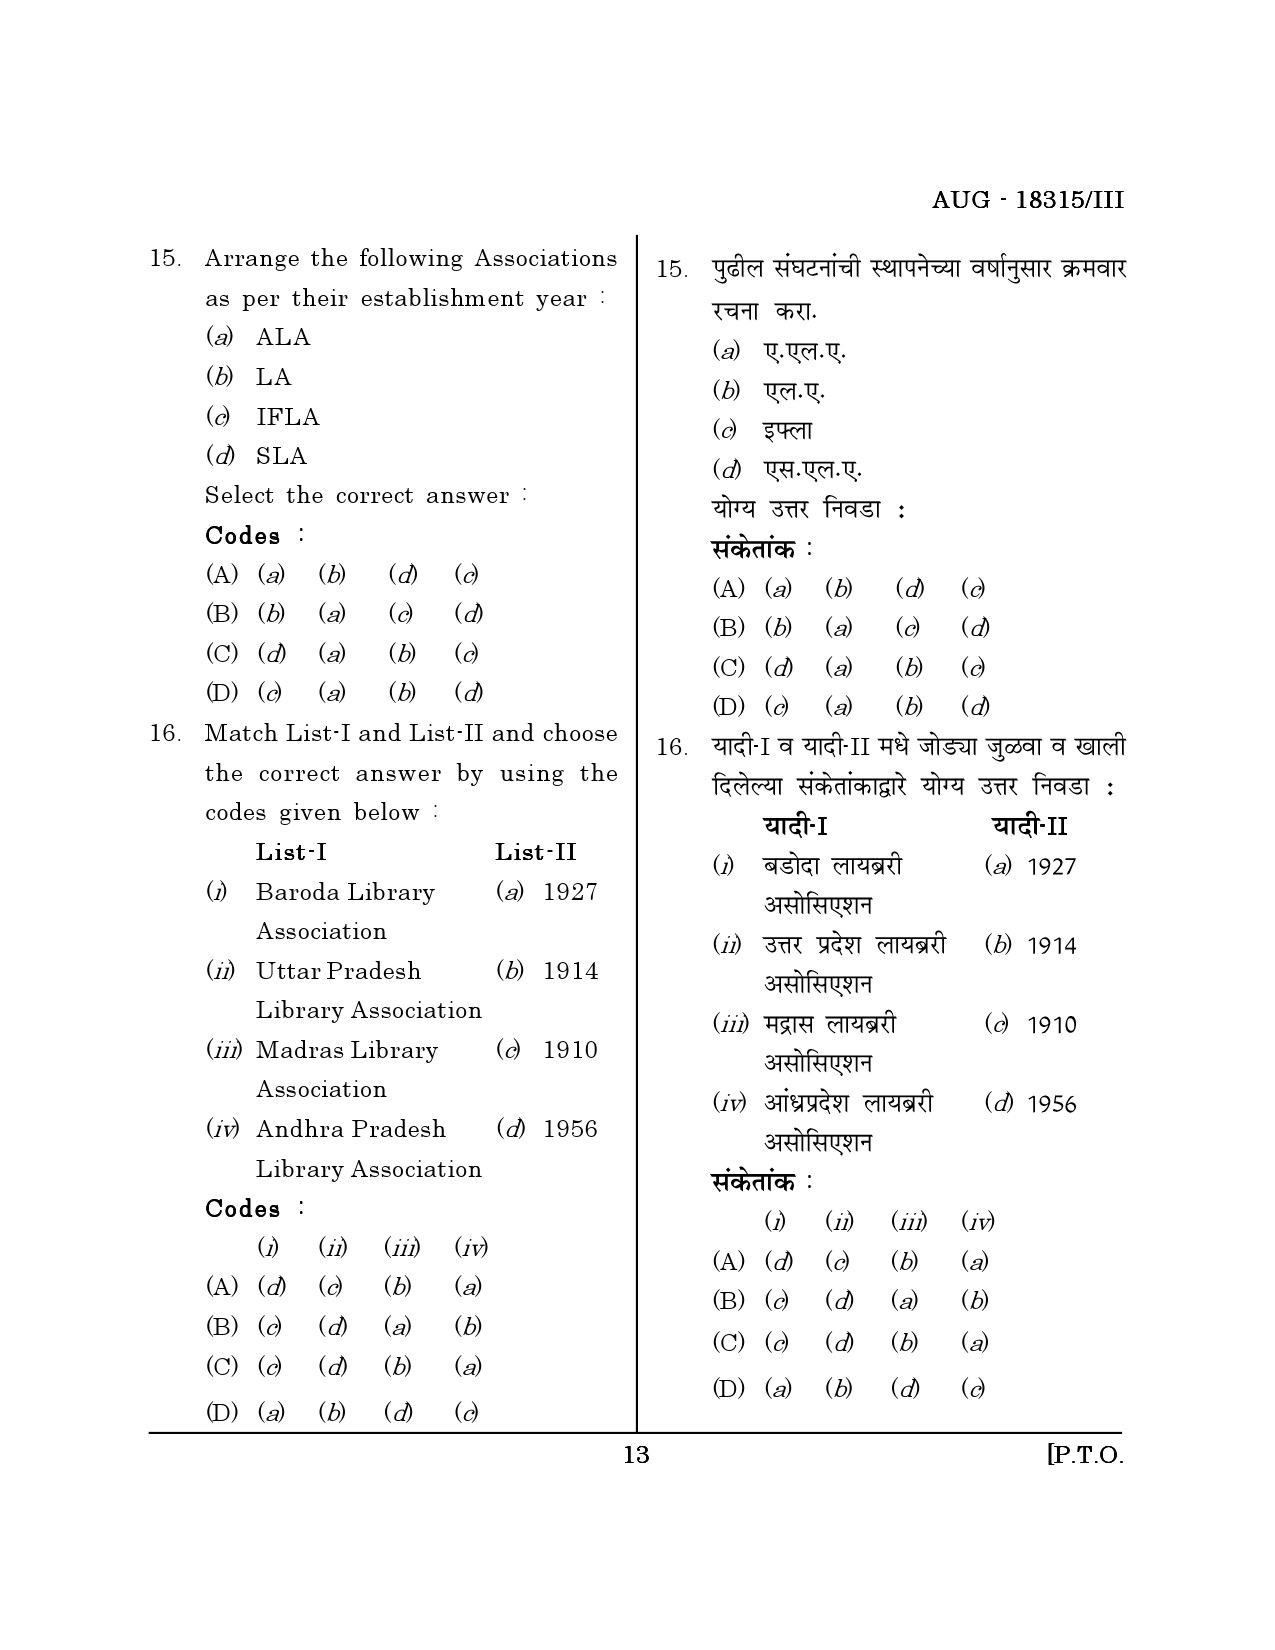 Maharashtra SET Library Information Science Question Paper III August 2015 12